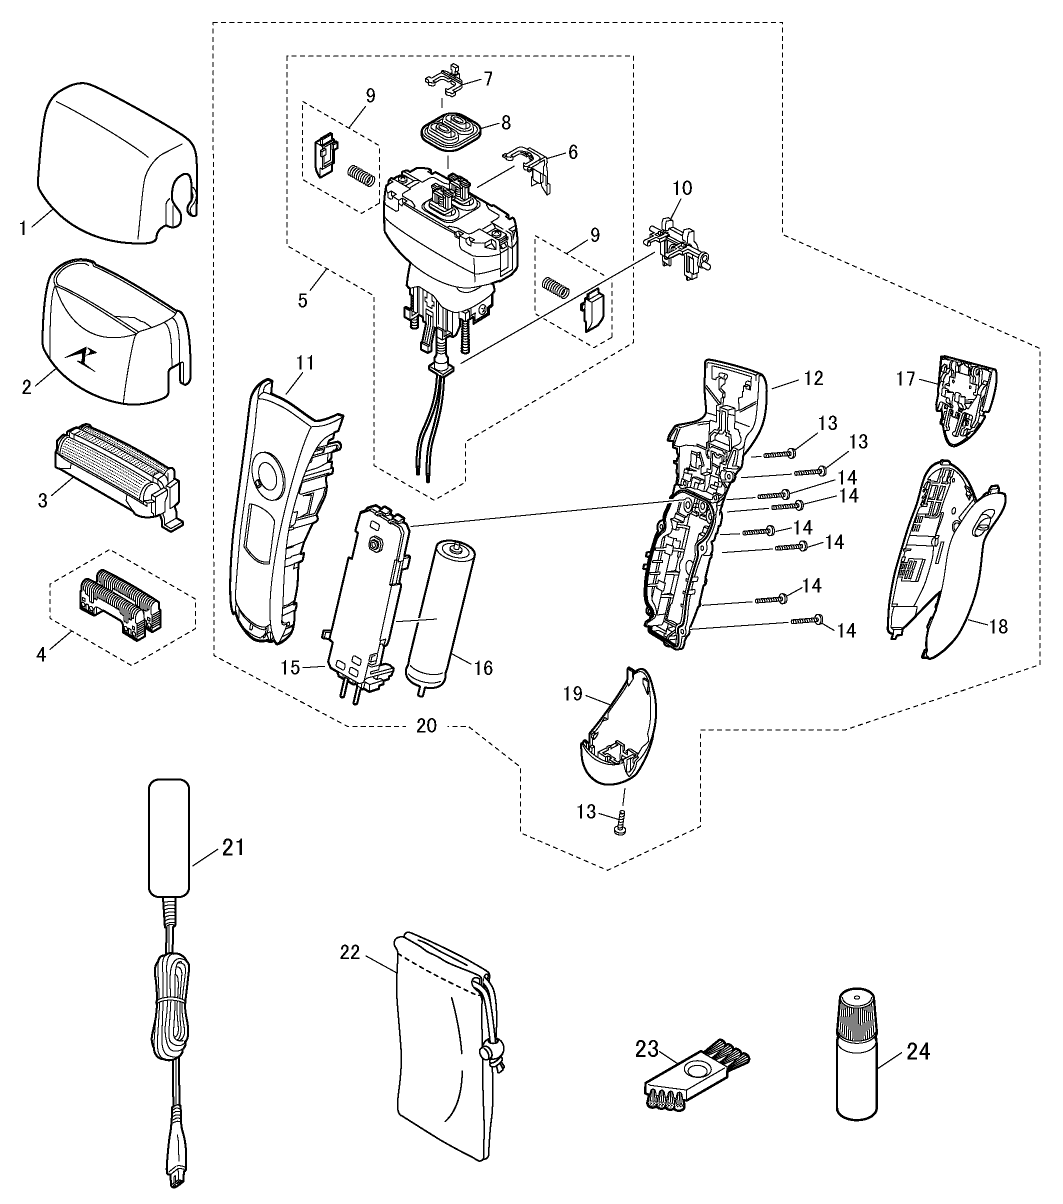 ES-LT3: Exploded View